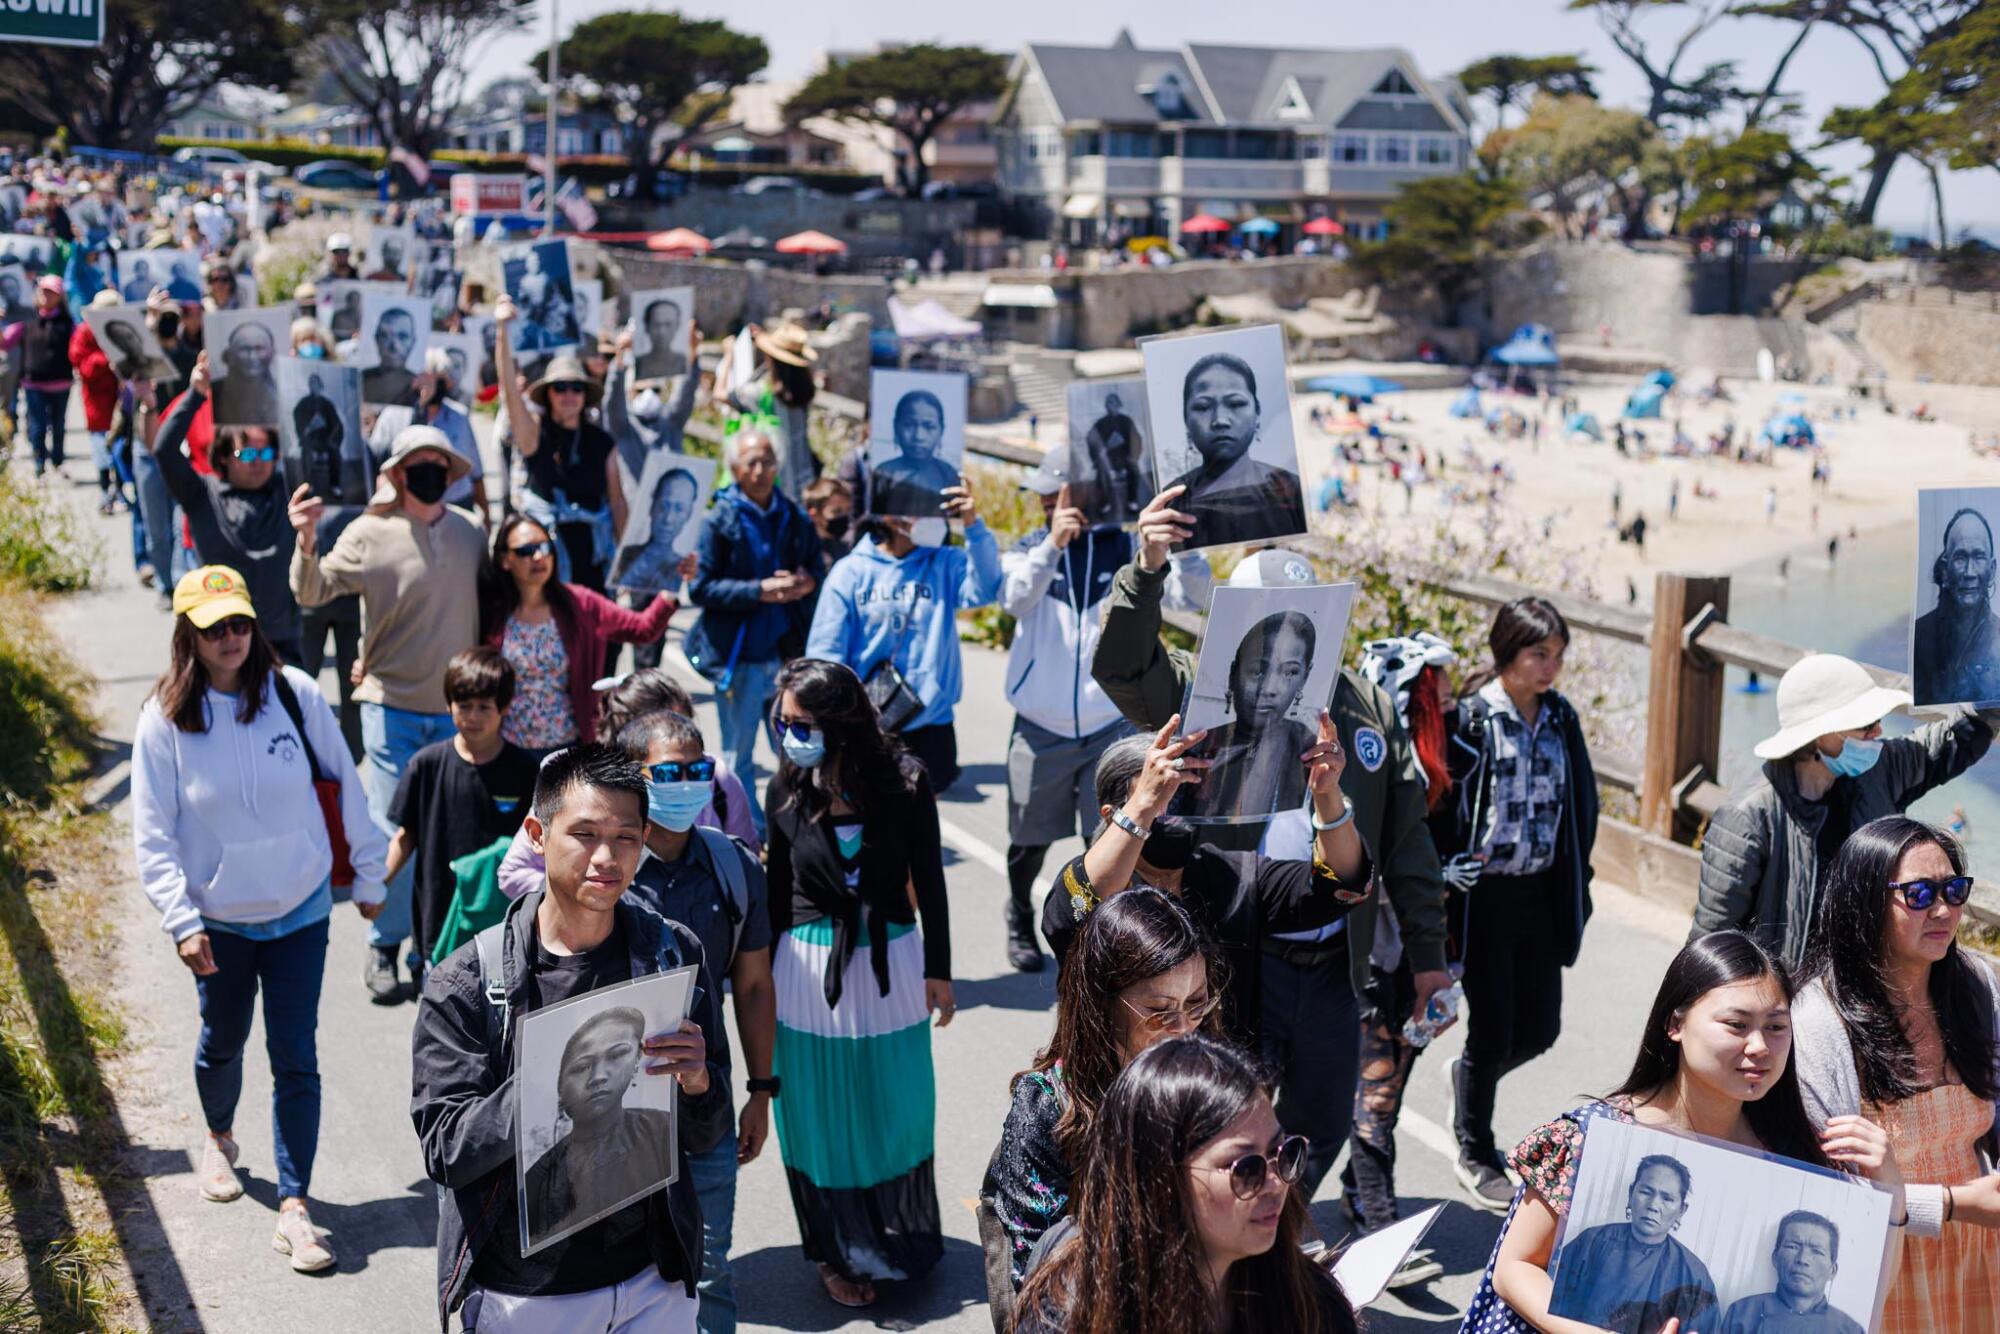 A crowd marching with enlarged historic portraits of people of Asian descent.